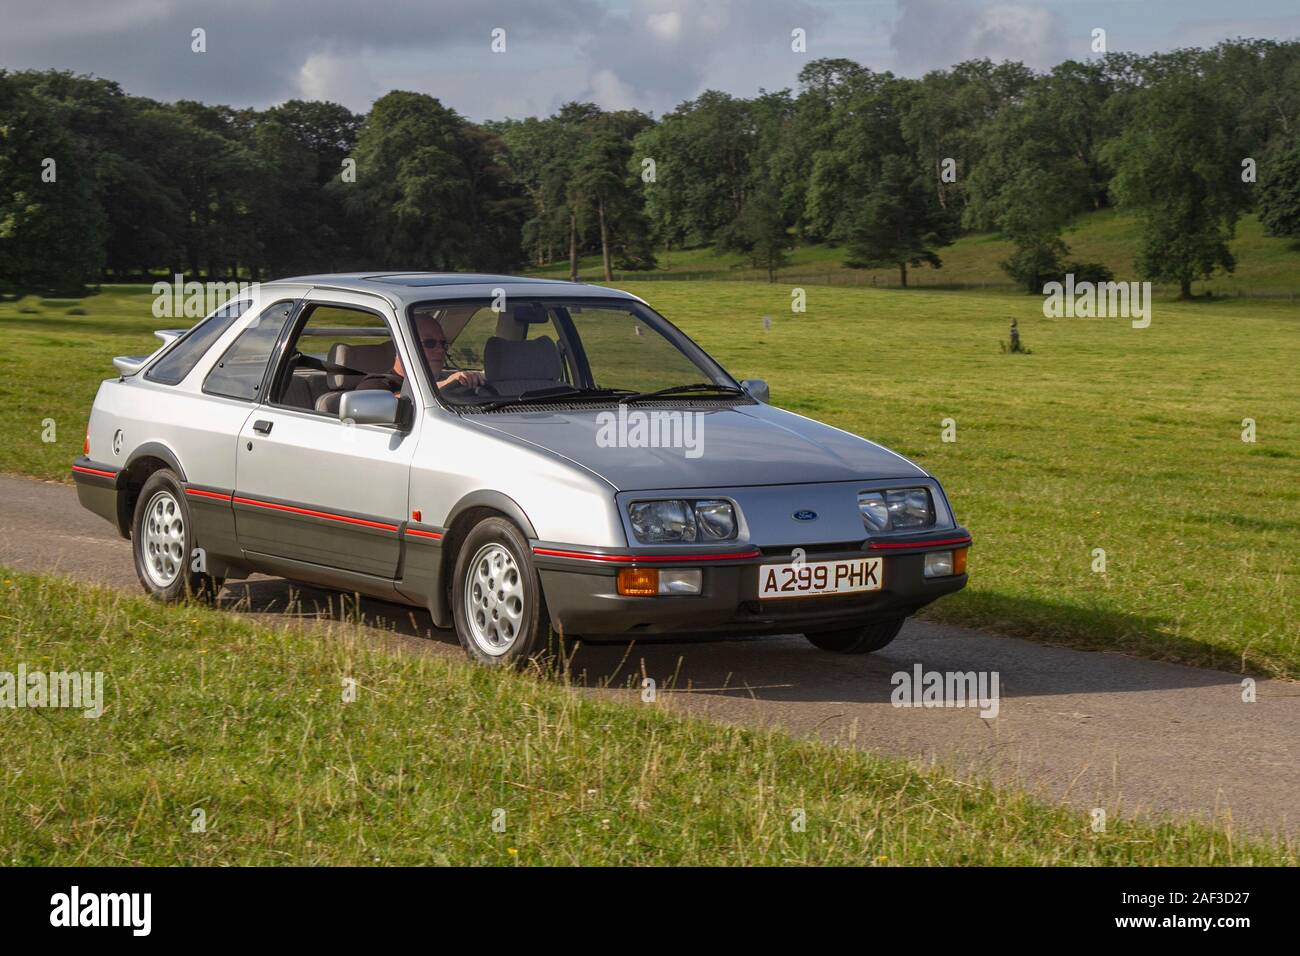 1983 80s silver Ford Sierra XR4i Classic cars, historics, cherished, old timers, collectable restored vintage veteran, vehicles of yesteryear arriving for the Mark Woodward historical motoring event at Leighton Hall, Carnforth, UK Stock Photo